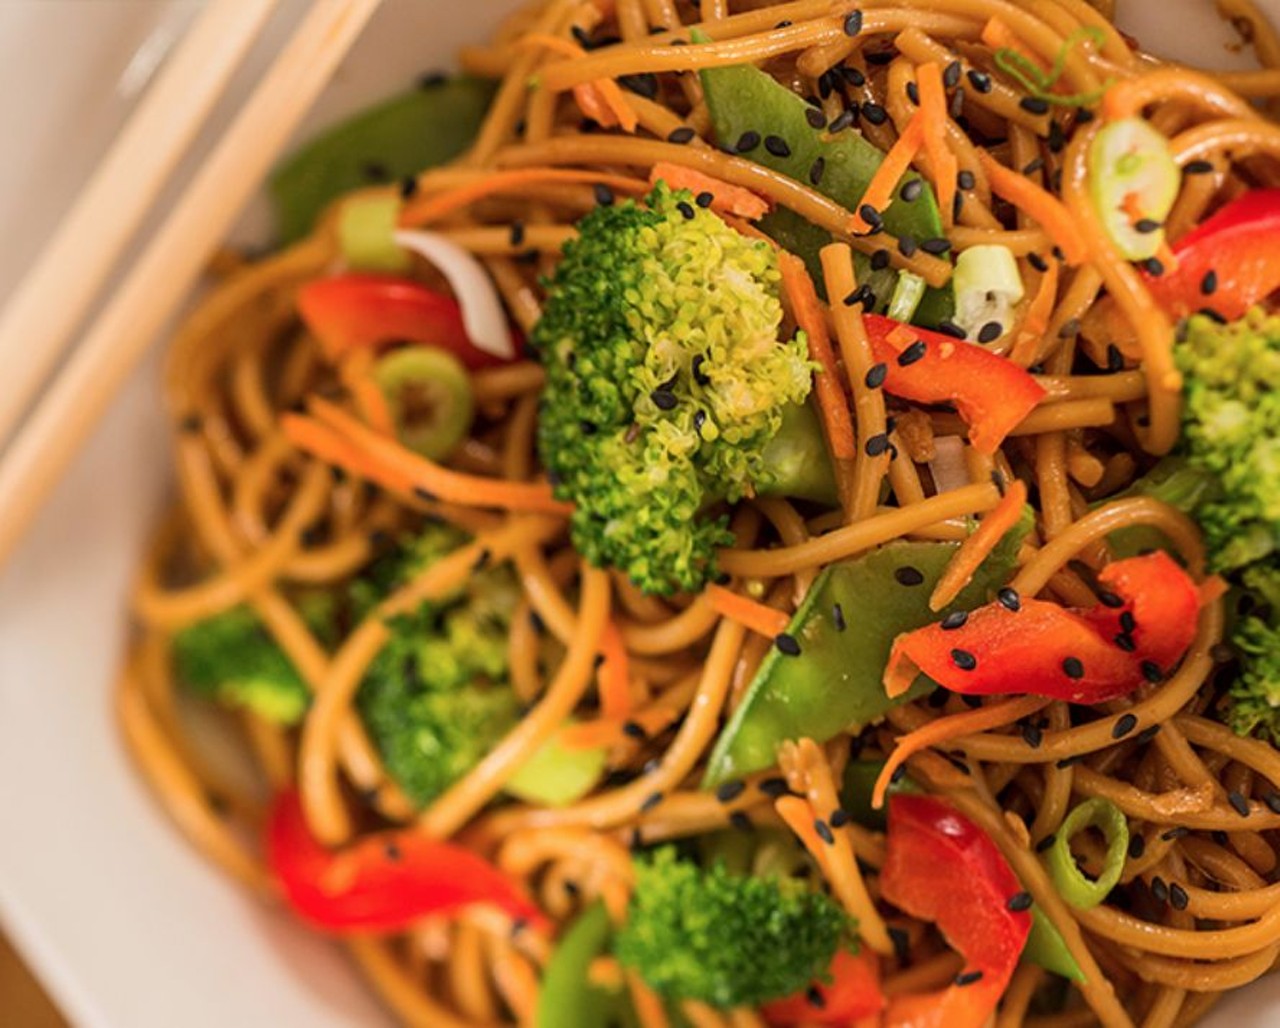 Must try: Chilled Sesame Lo-Mein Noodle
Photo via Disney Springs